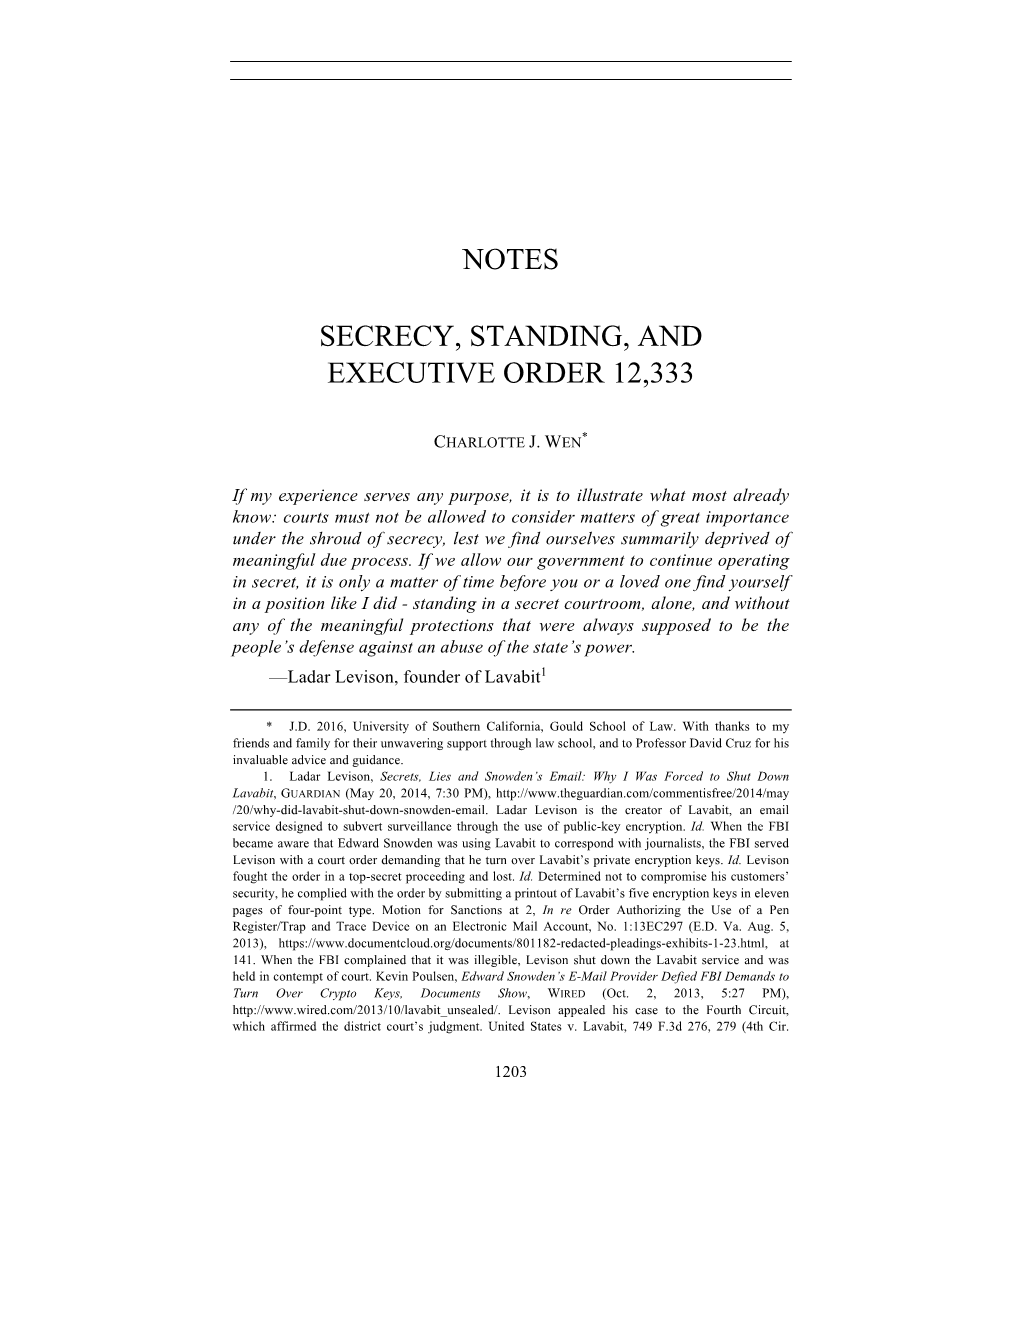 Notes Secrecy, Standing, and Executive Order 12,333